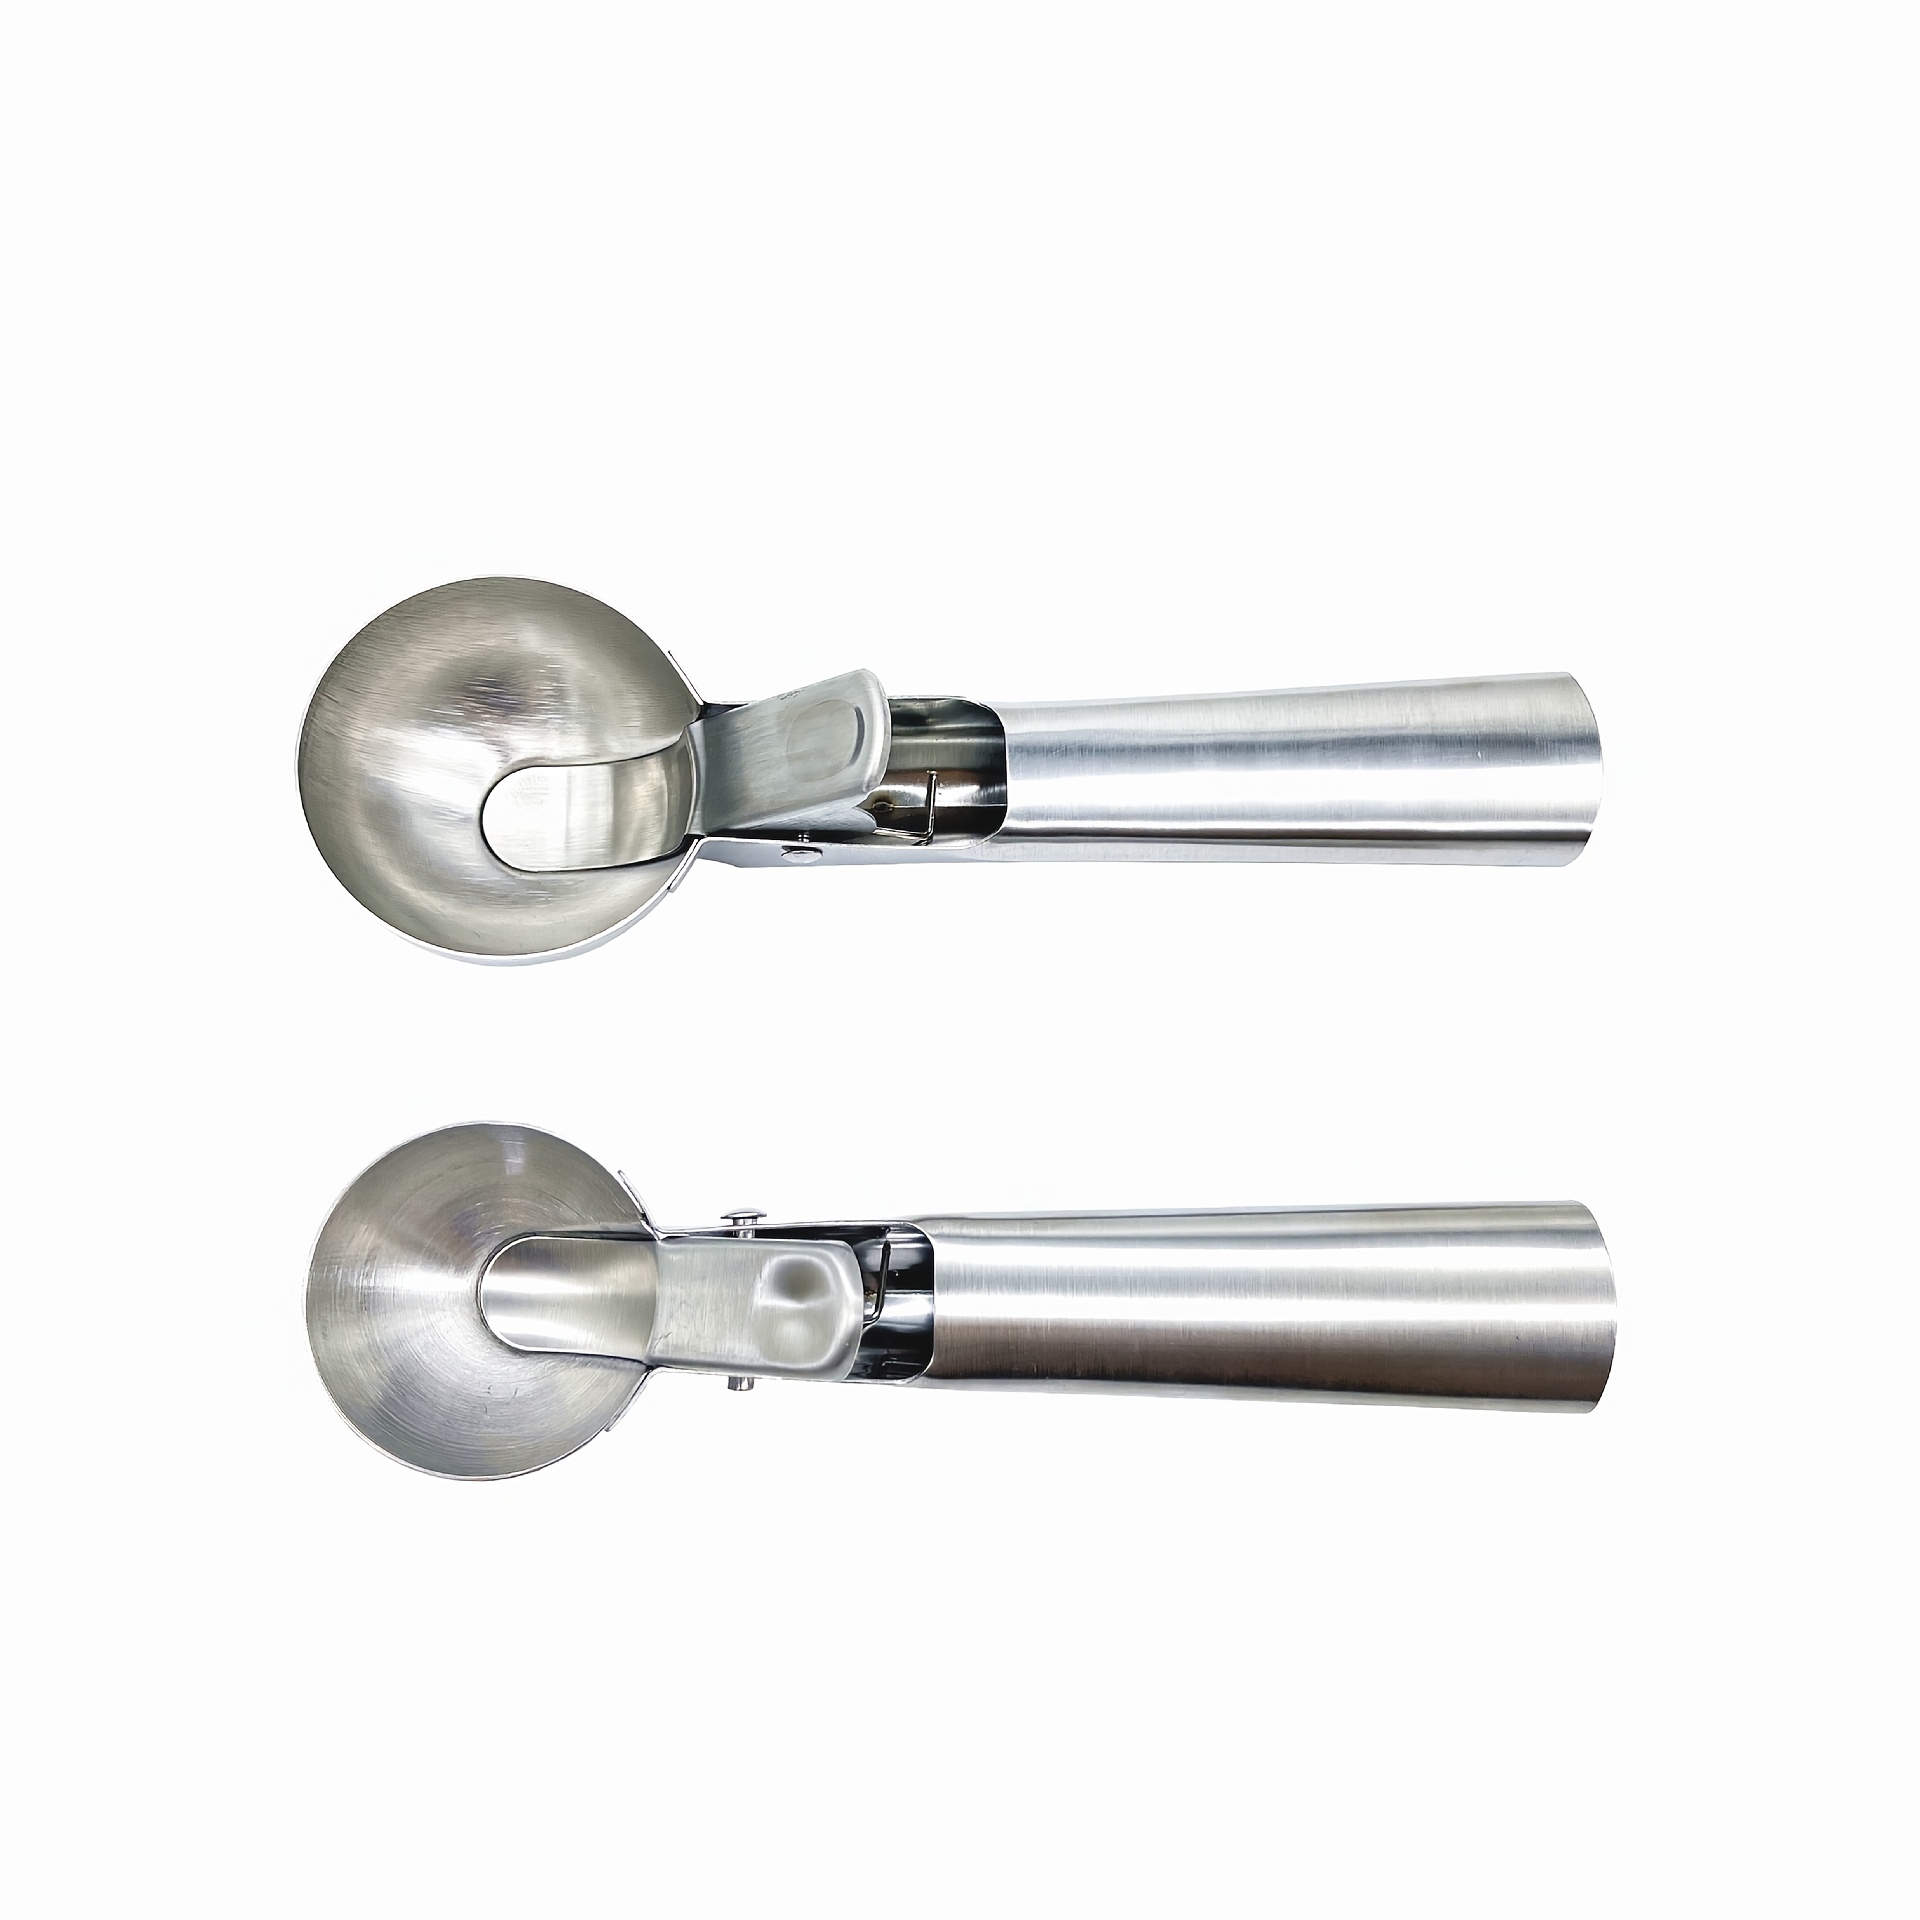 Stainless steel Ice Cream Scooper With Trigger design and Anti-Freeze  handle, Multi purpose for baking 